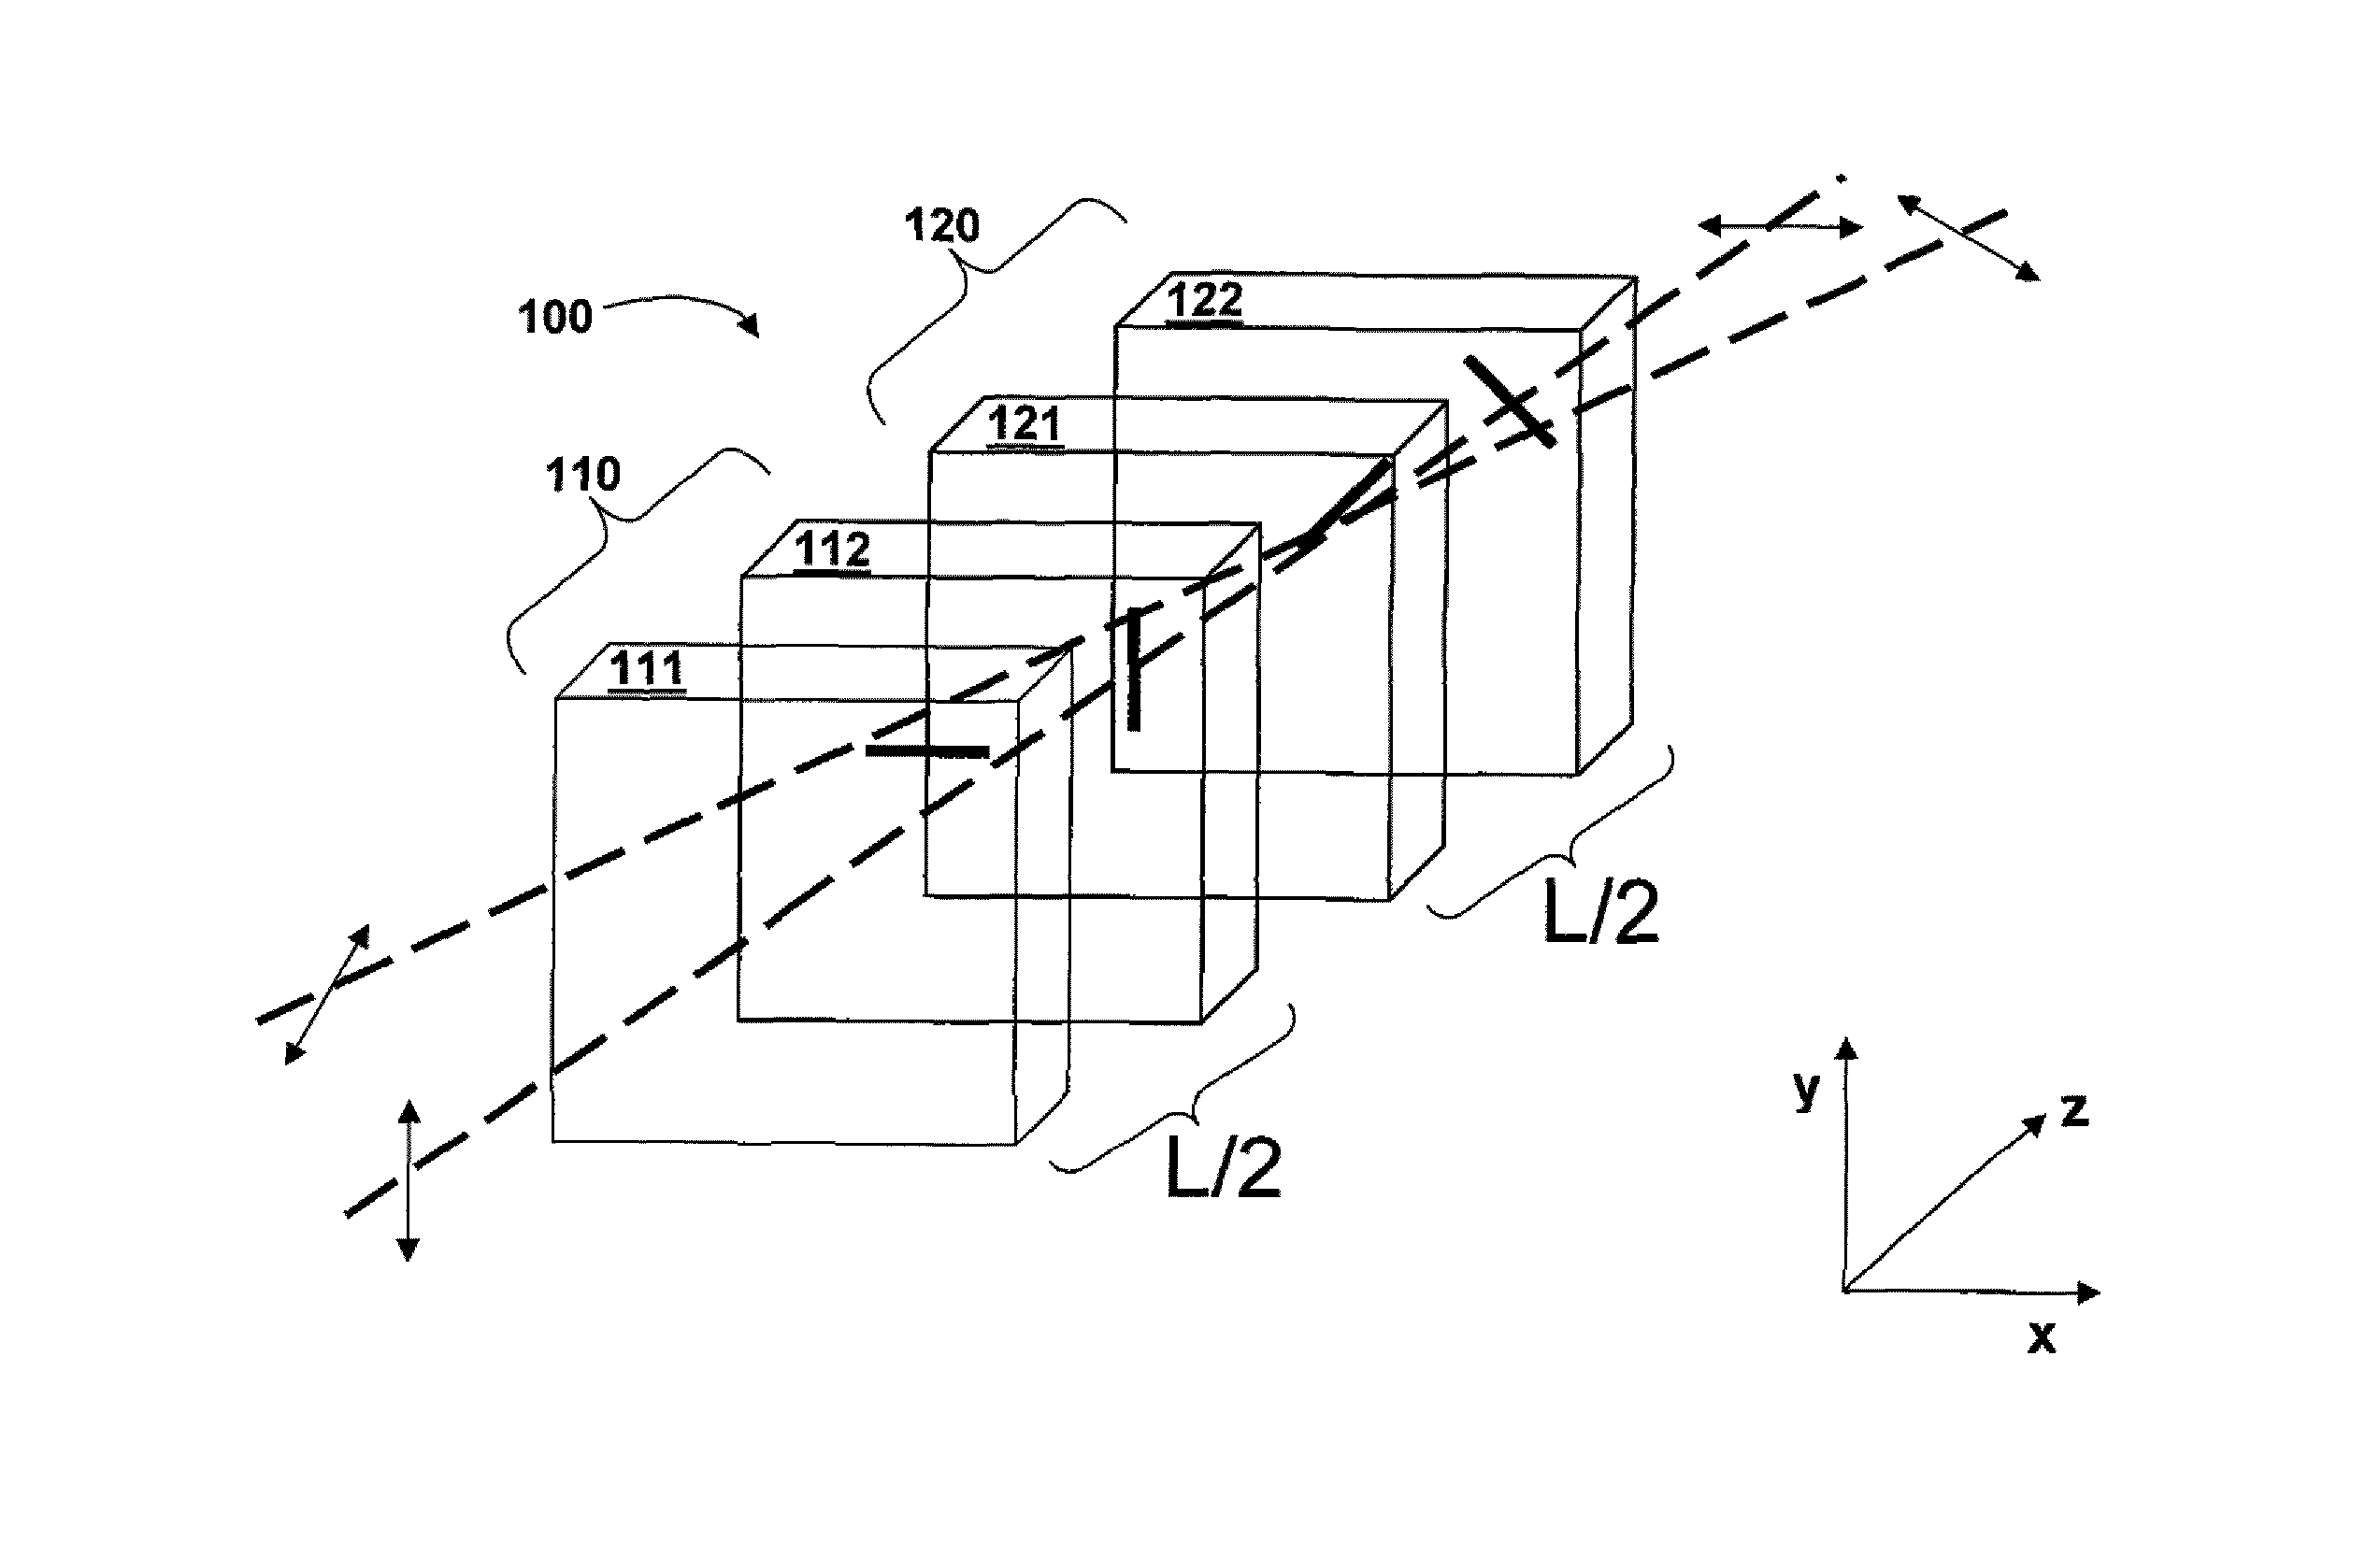 Polarization-influencing optical arrangement, in particular in a microlithographic projection exposure apparatus